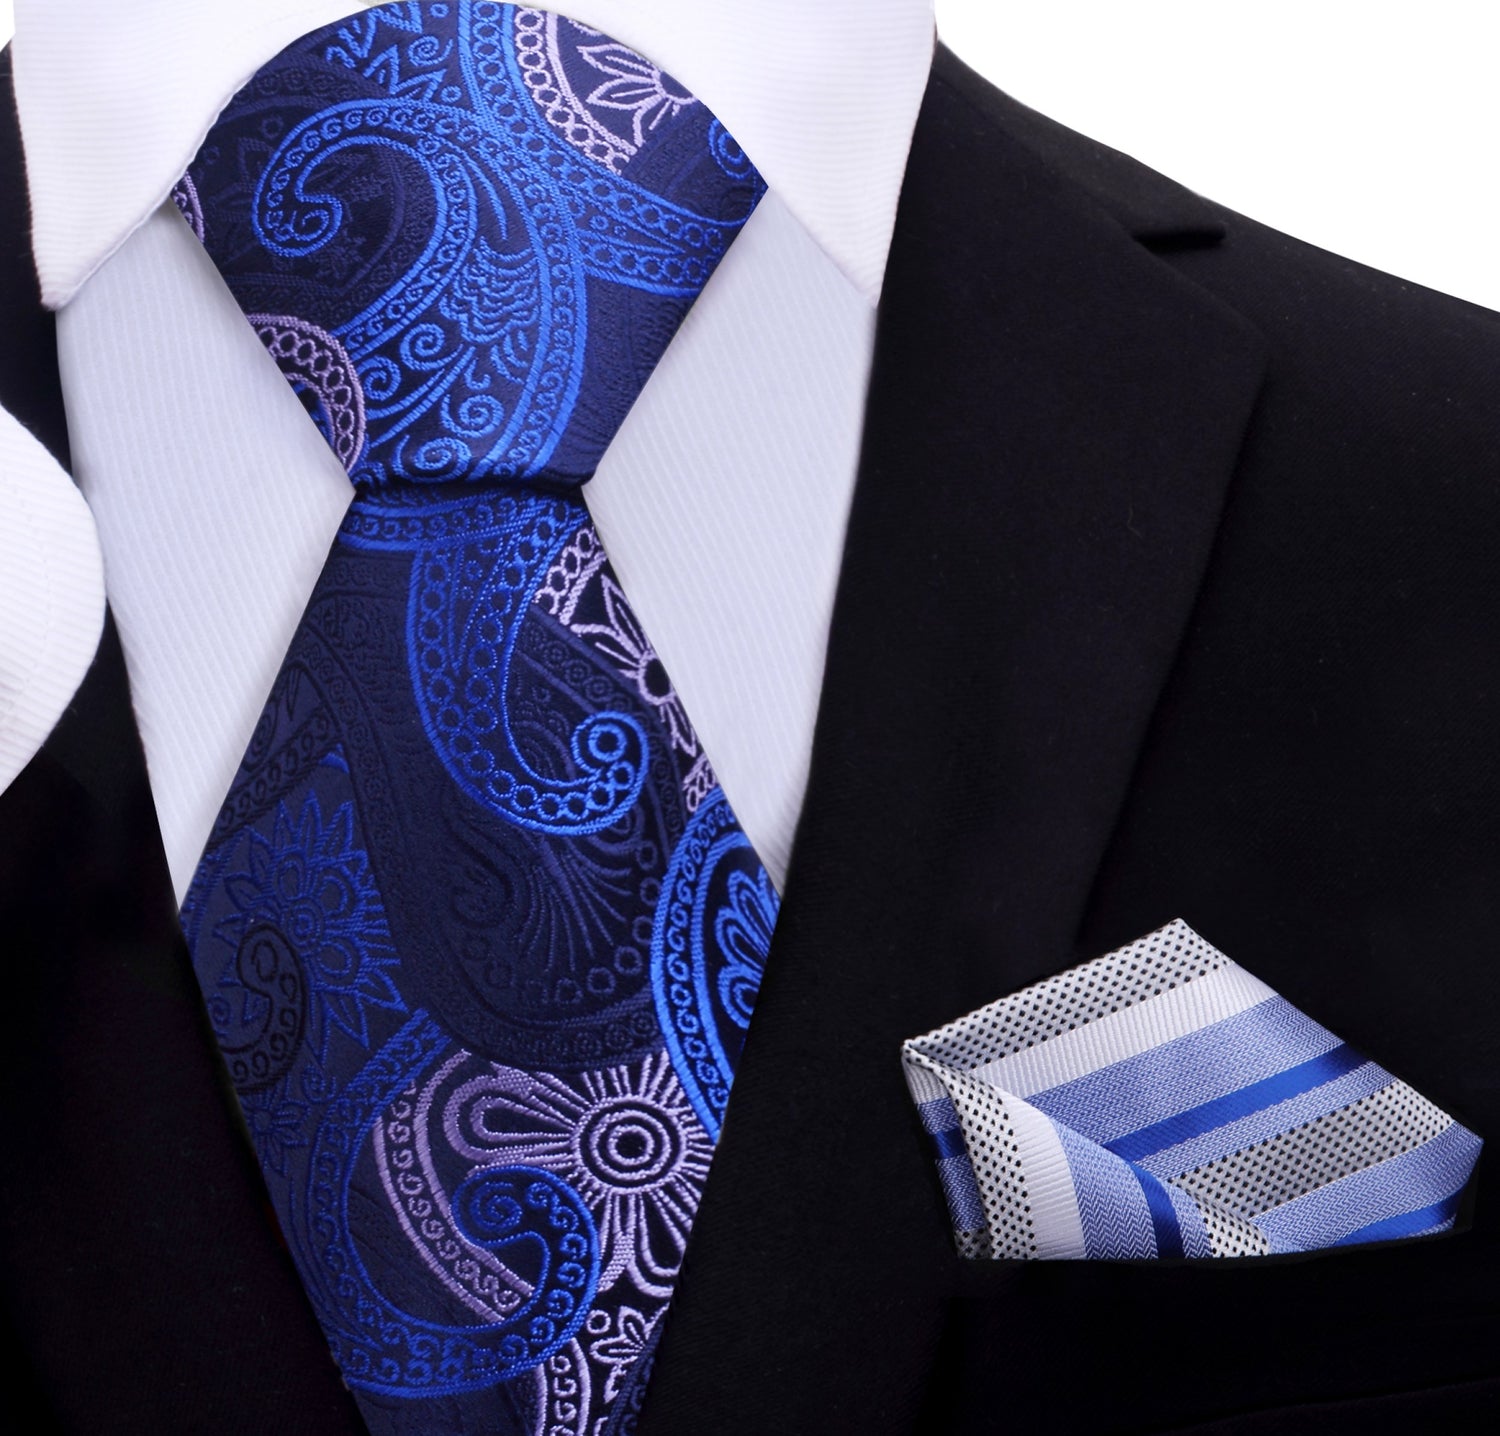 Shades of Blue and White Paisley Necktie and White, Blue Stripe Square